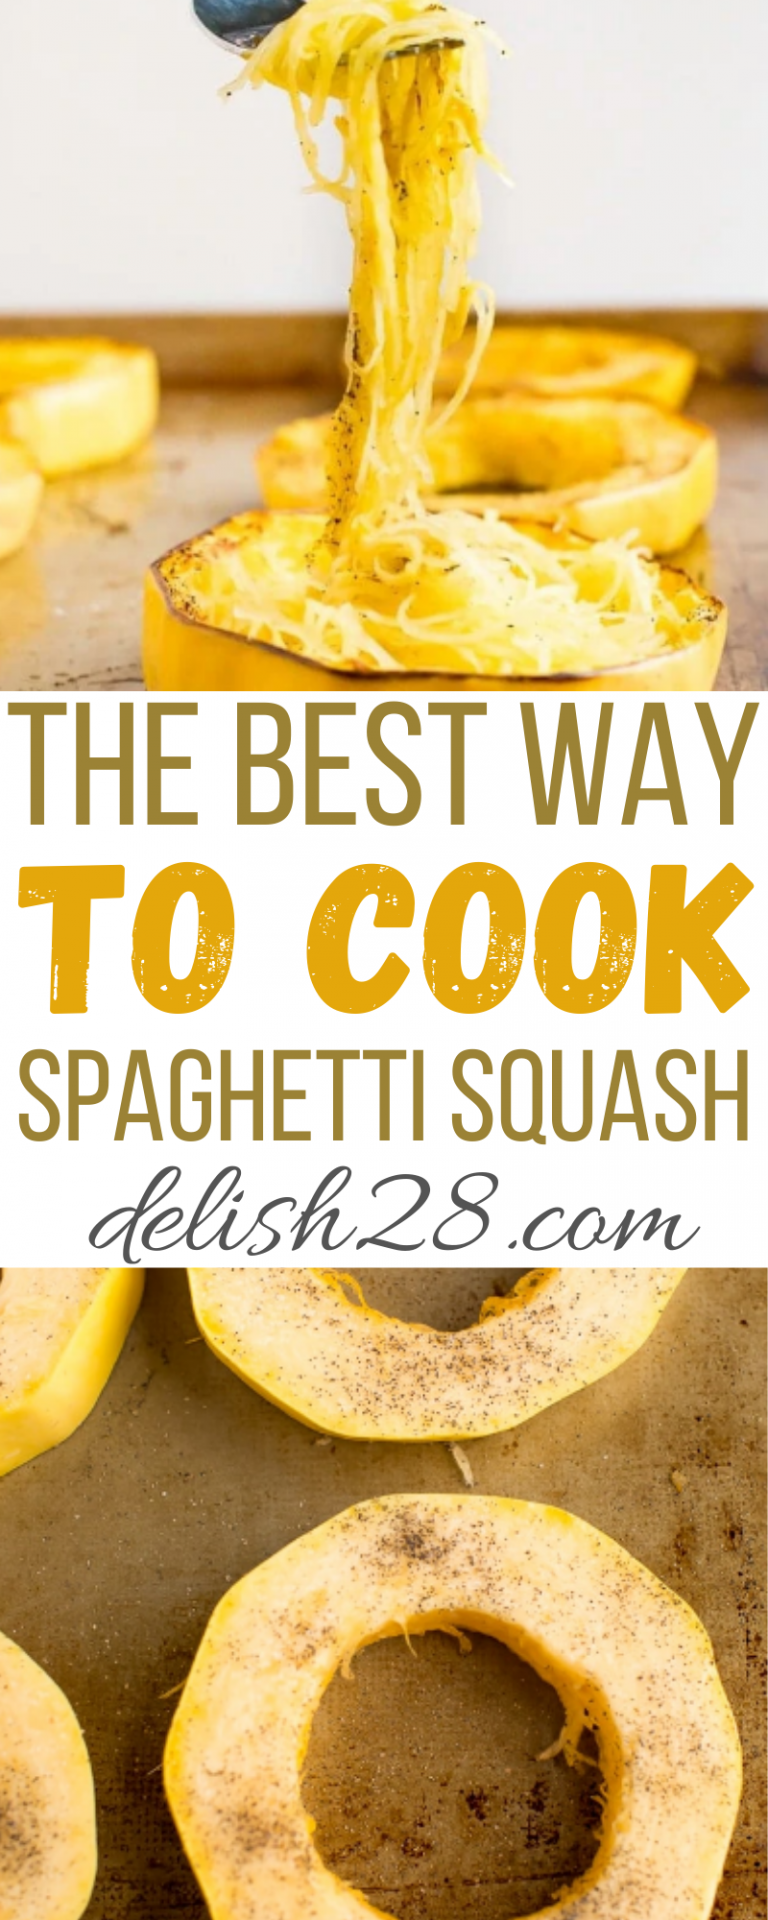 THE BEST WAY TO COOK SPAGHETTI SQUASH - Delish28